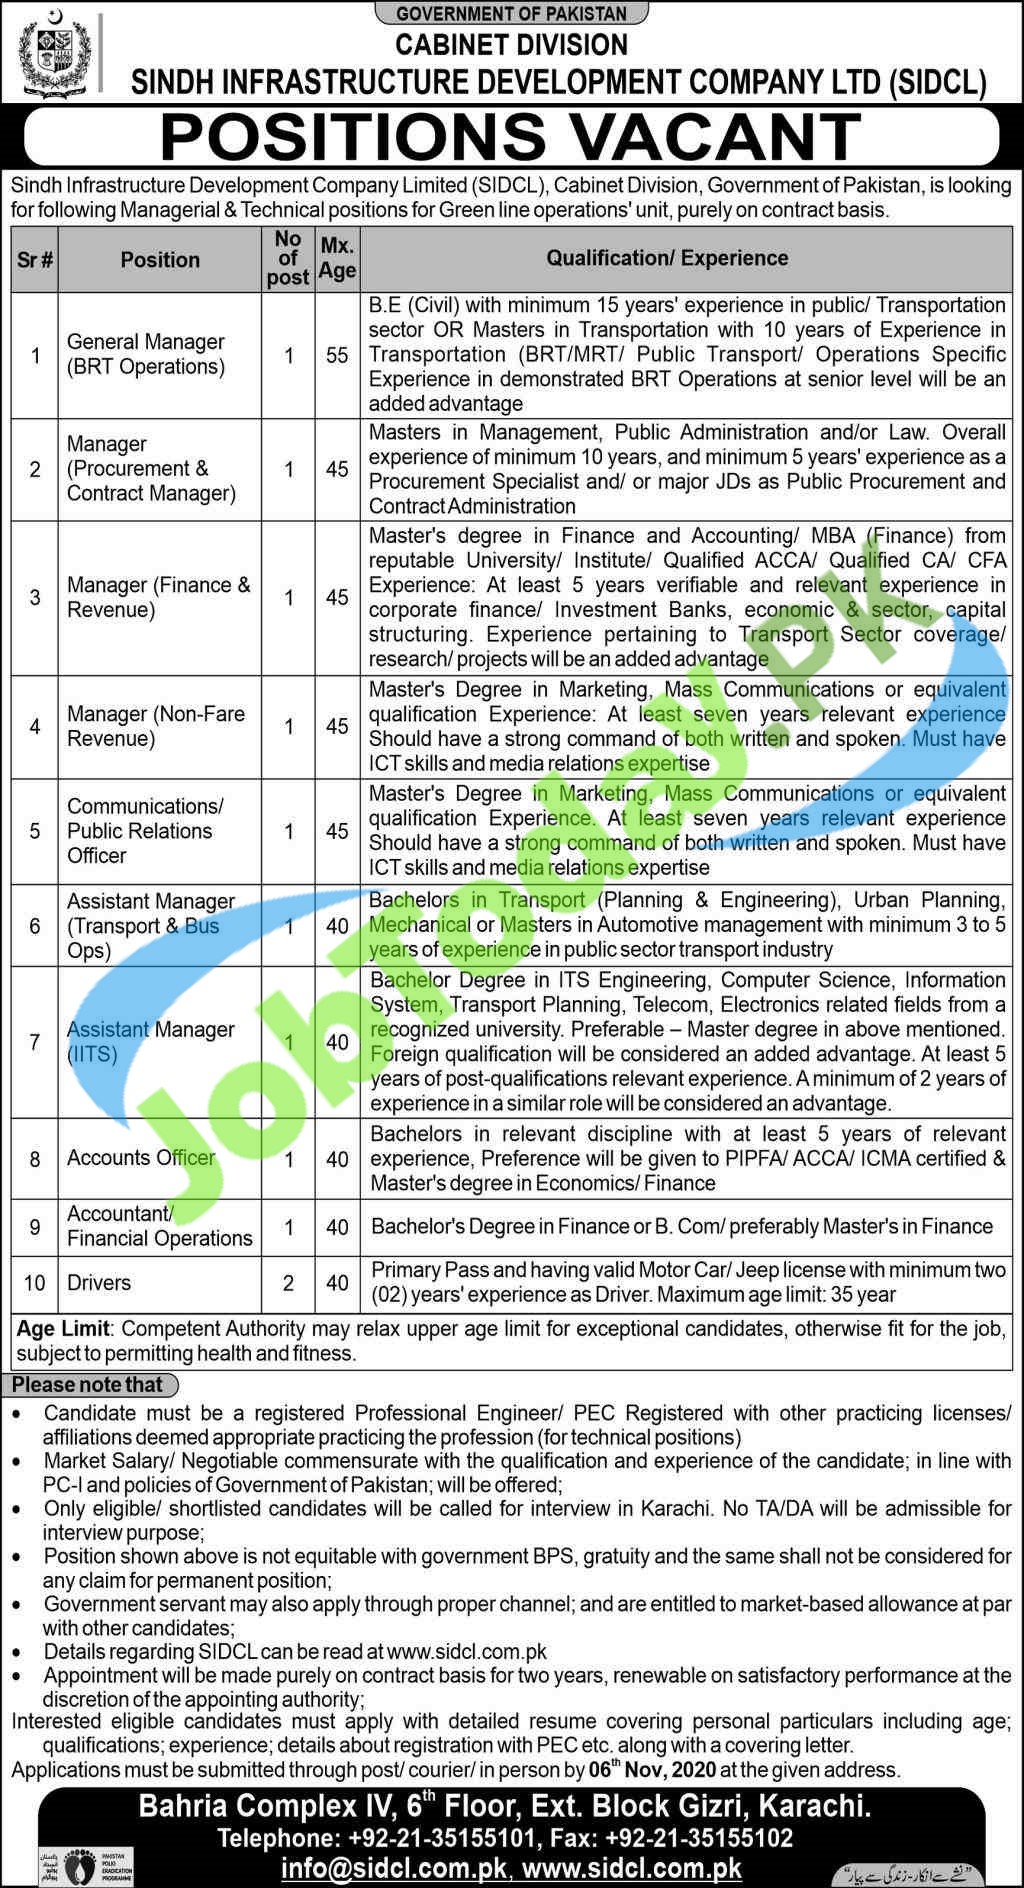 sindh-infrastructure-development-company-limited-sidcl-jobs-2020